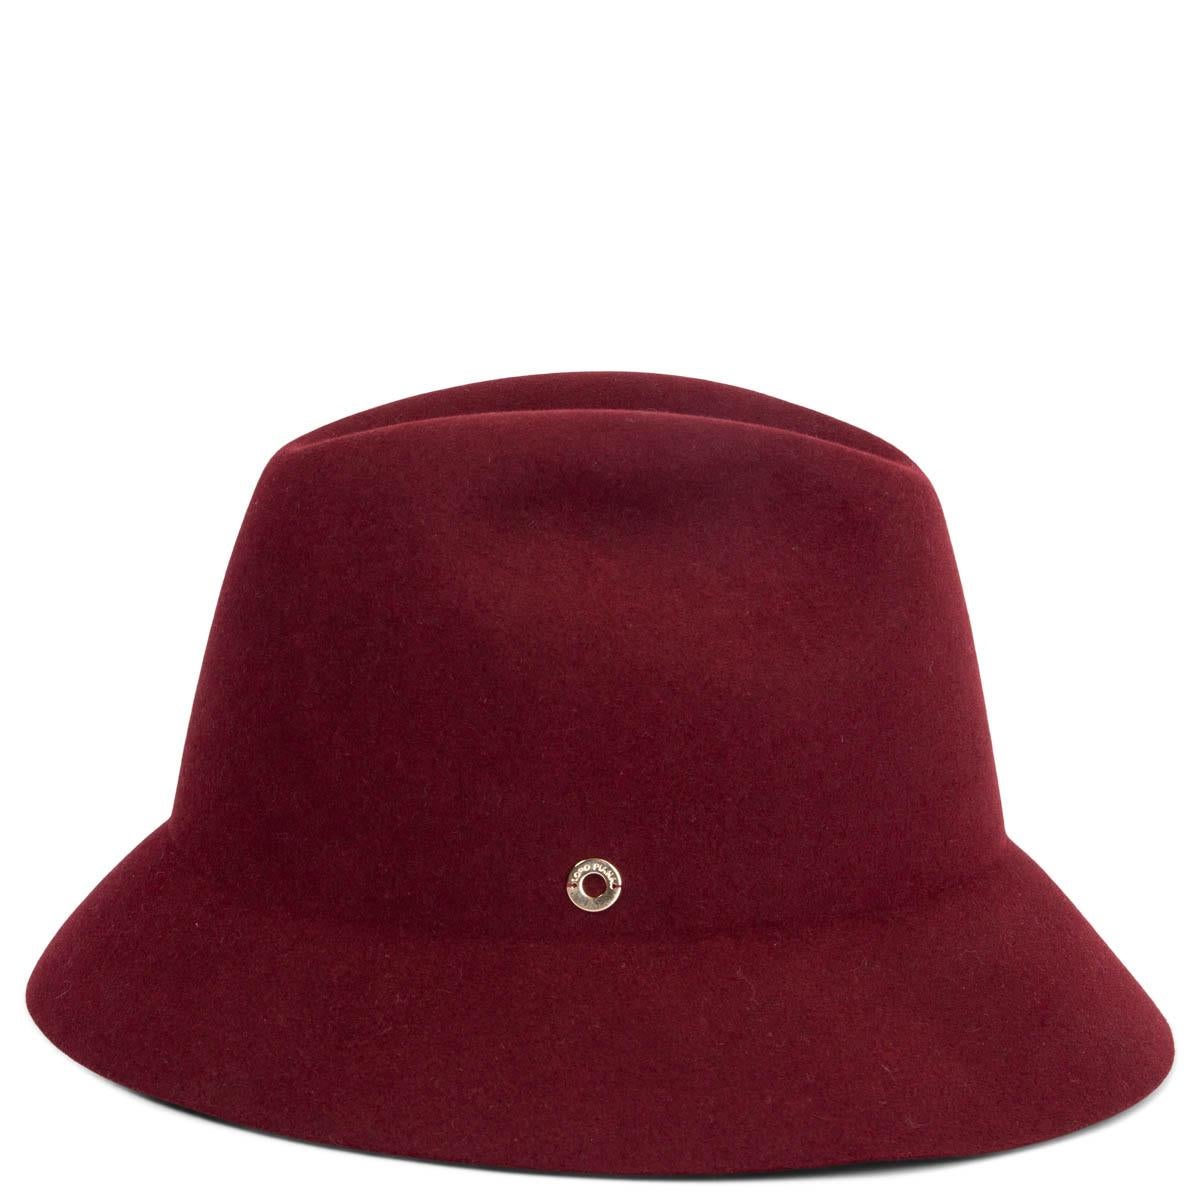 100% authentic Loro Piana My Journey hat in burgundy rabbit hair and baby cashmere. Has been once and is in excellent condition.  

Measurements
Tag Size	M
Inside Circumference	58cm (22.6in)

All our listings include only the listed item unless